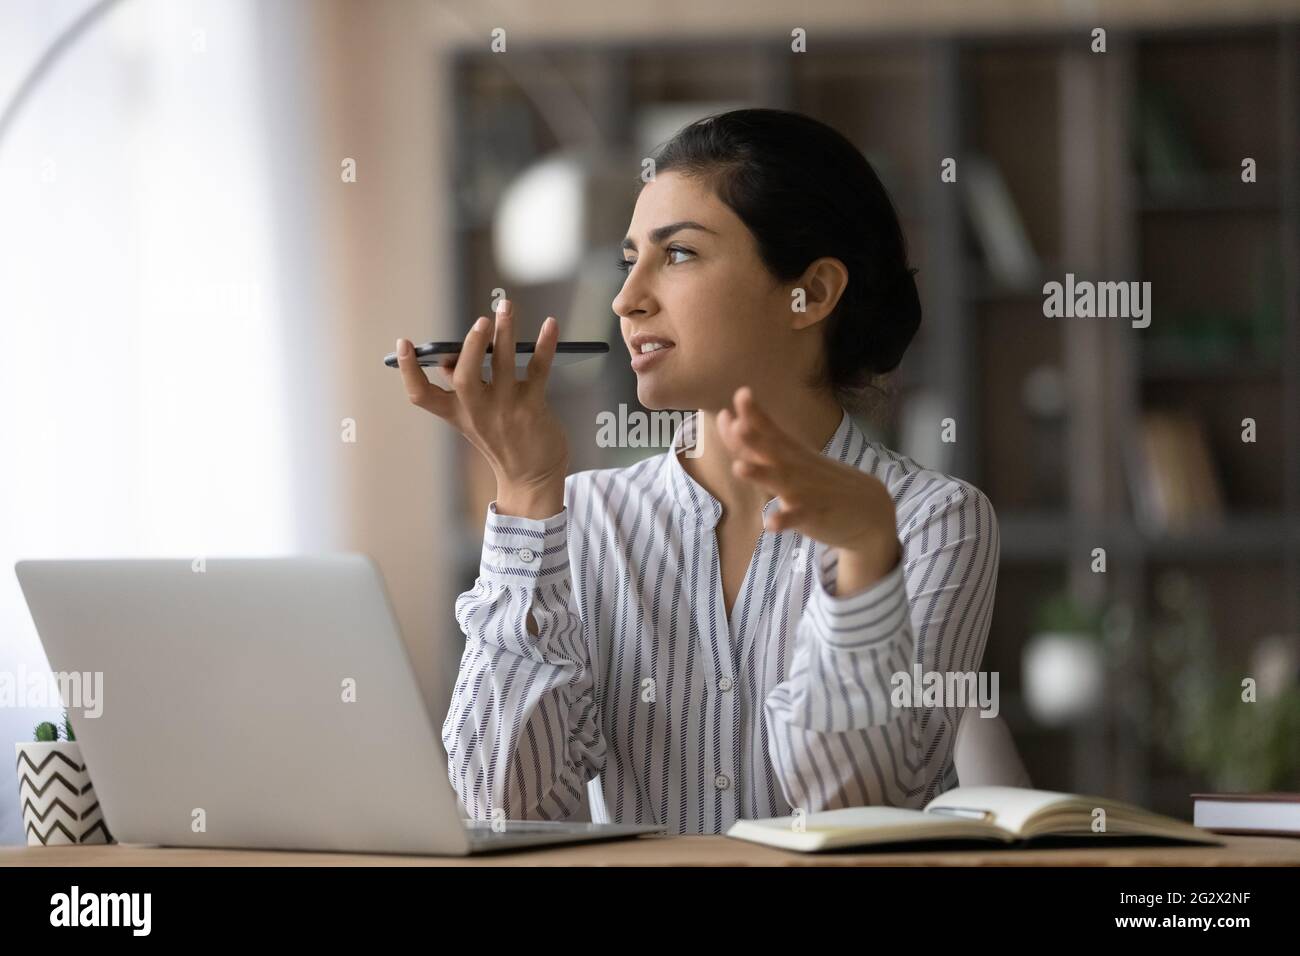 Young ethnic female scientist record work results using smartphone app Stock Photo